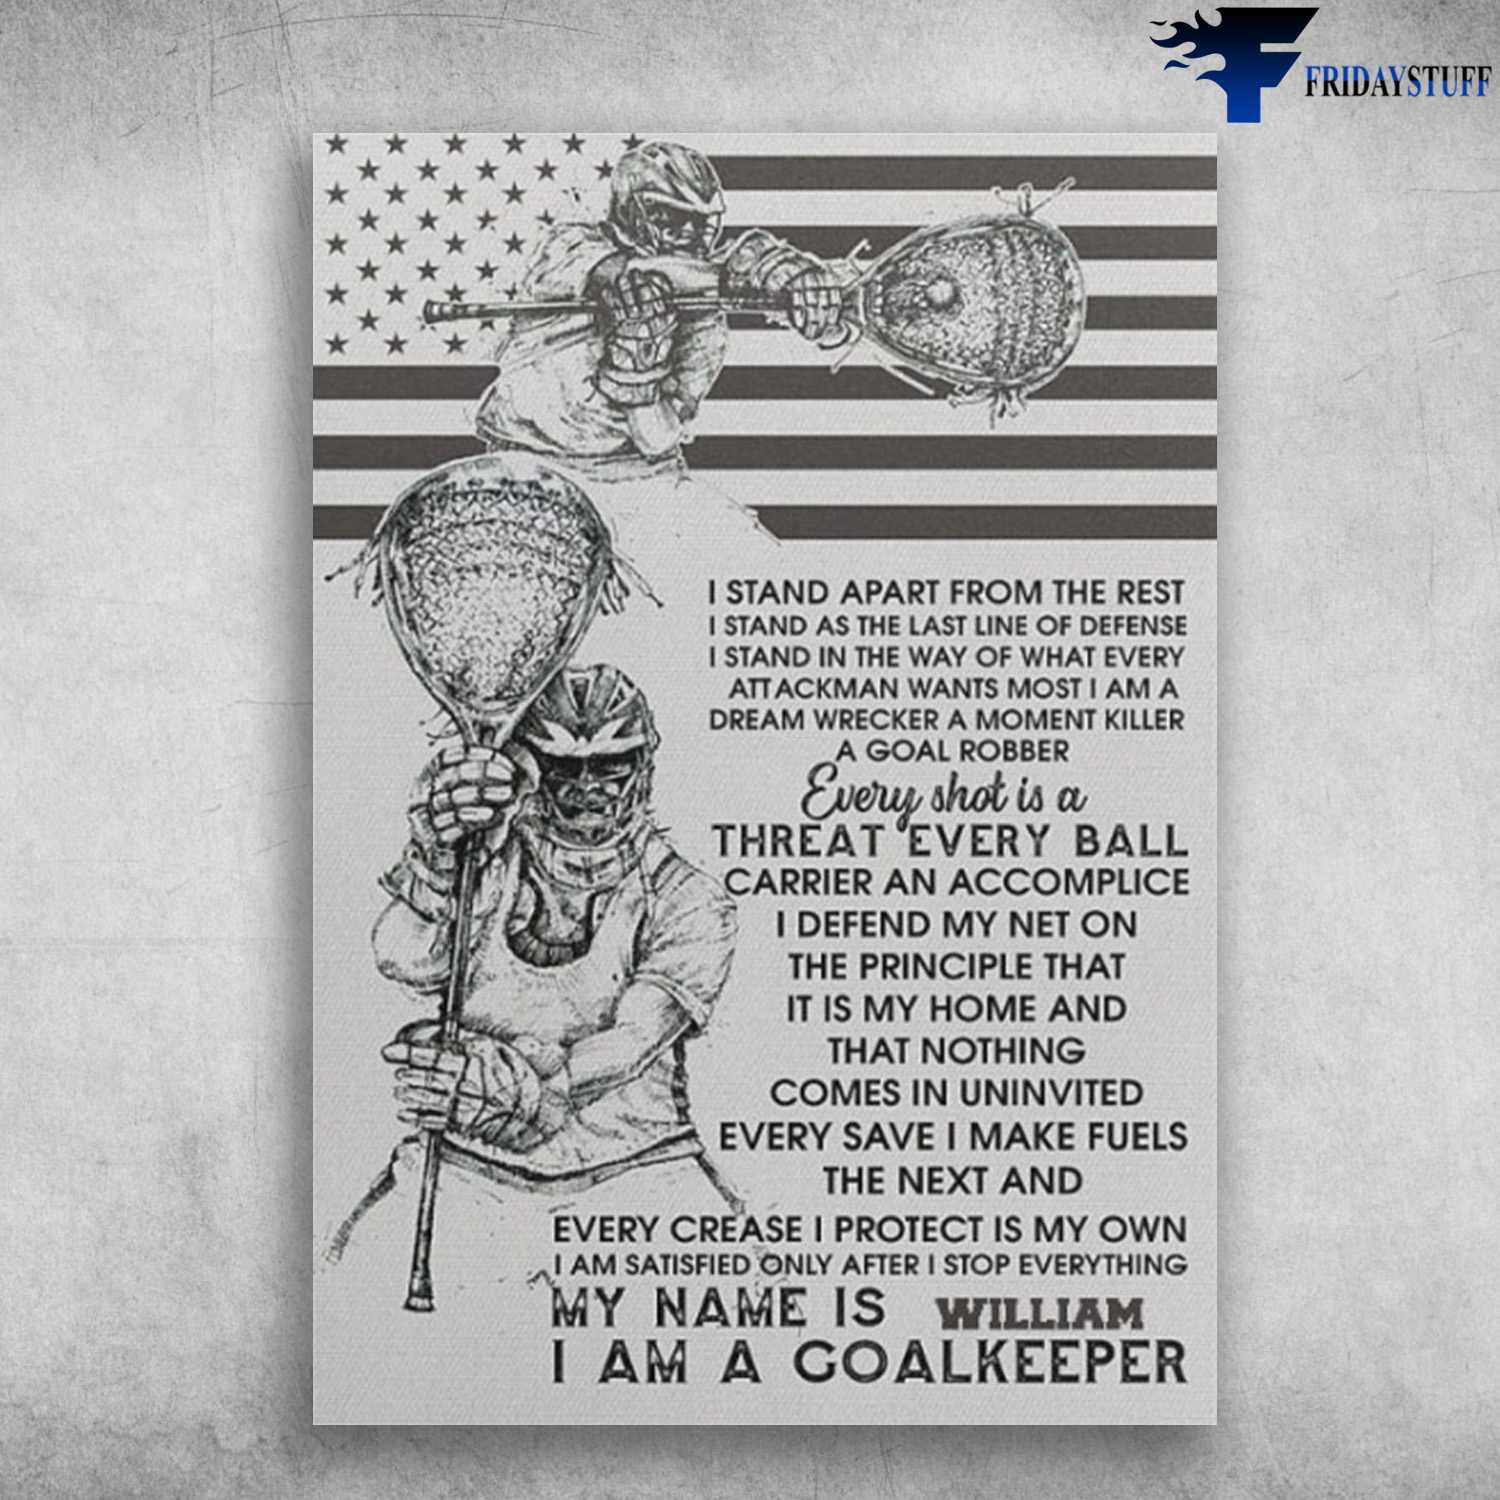 Lacrosse Poster, Lacrosse Decor, I Stand Apart From The Rest, I Stand As The Last Line Of Defwnse, I Stand In The Way Of What Every Attachman, Wants Most I Am A Dream Wreaker A Moment Kikker, A Goal Robber